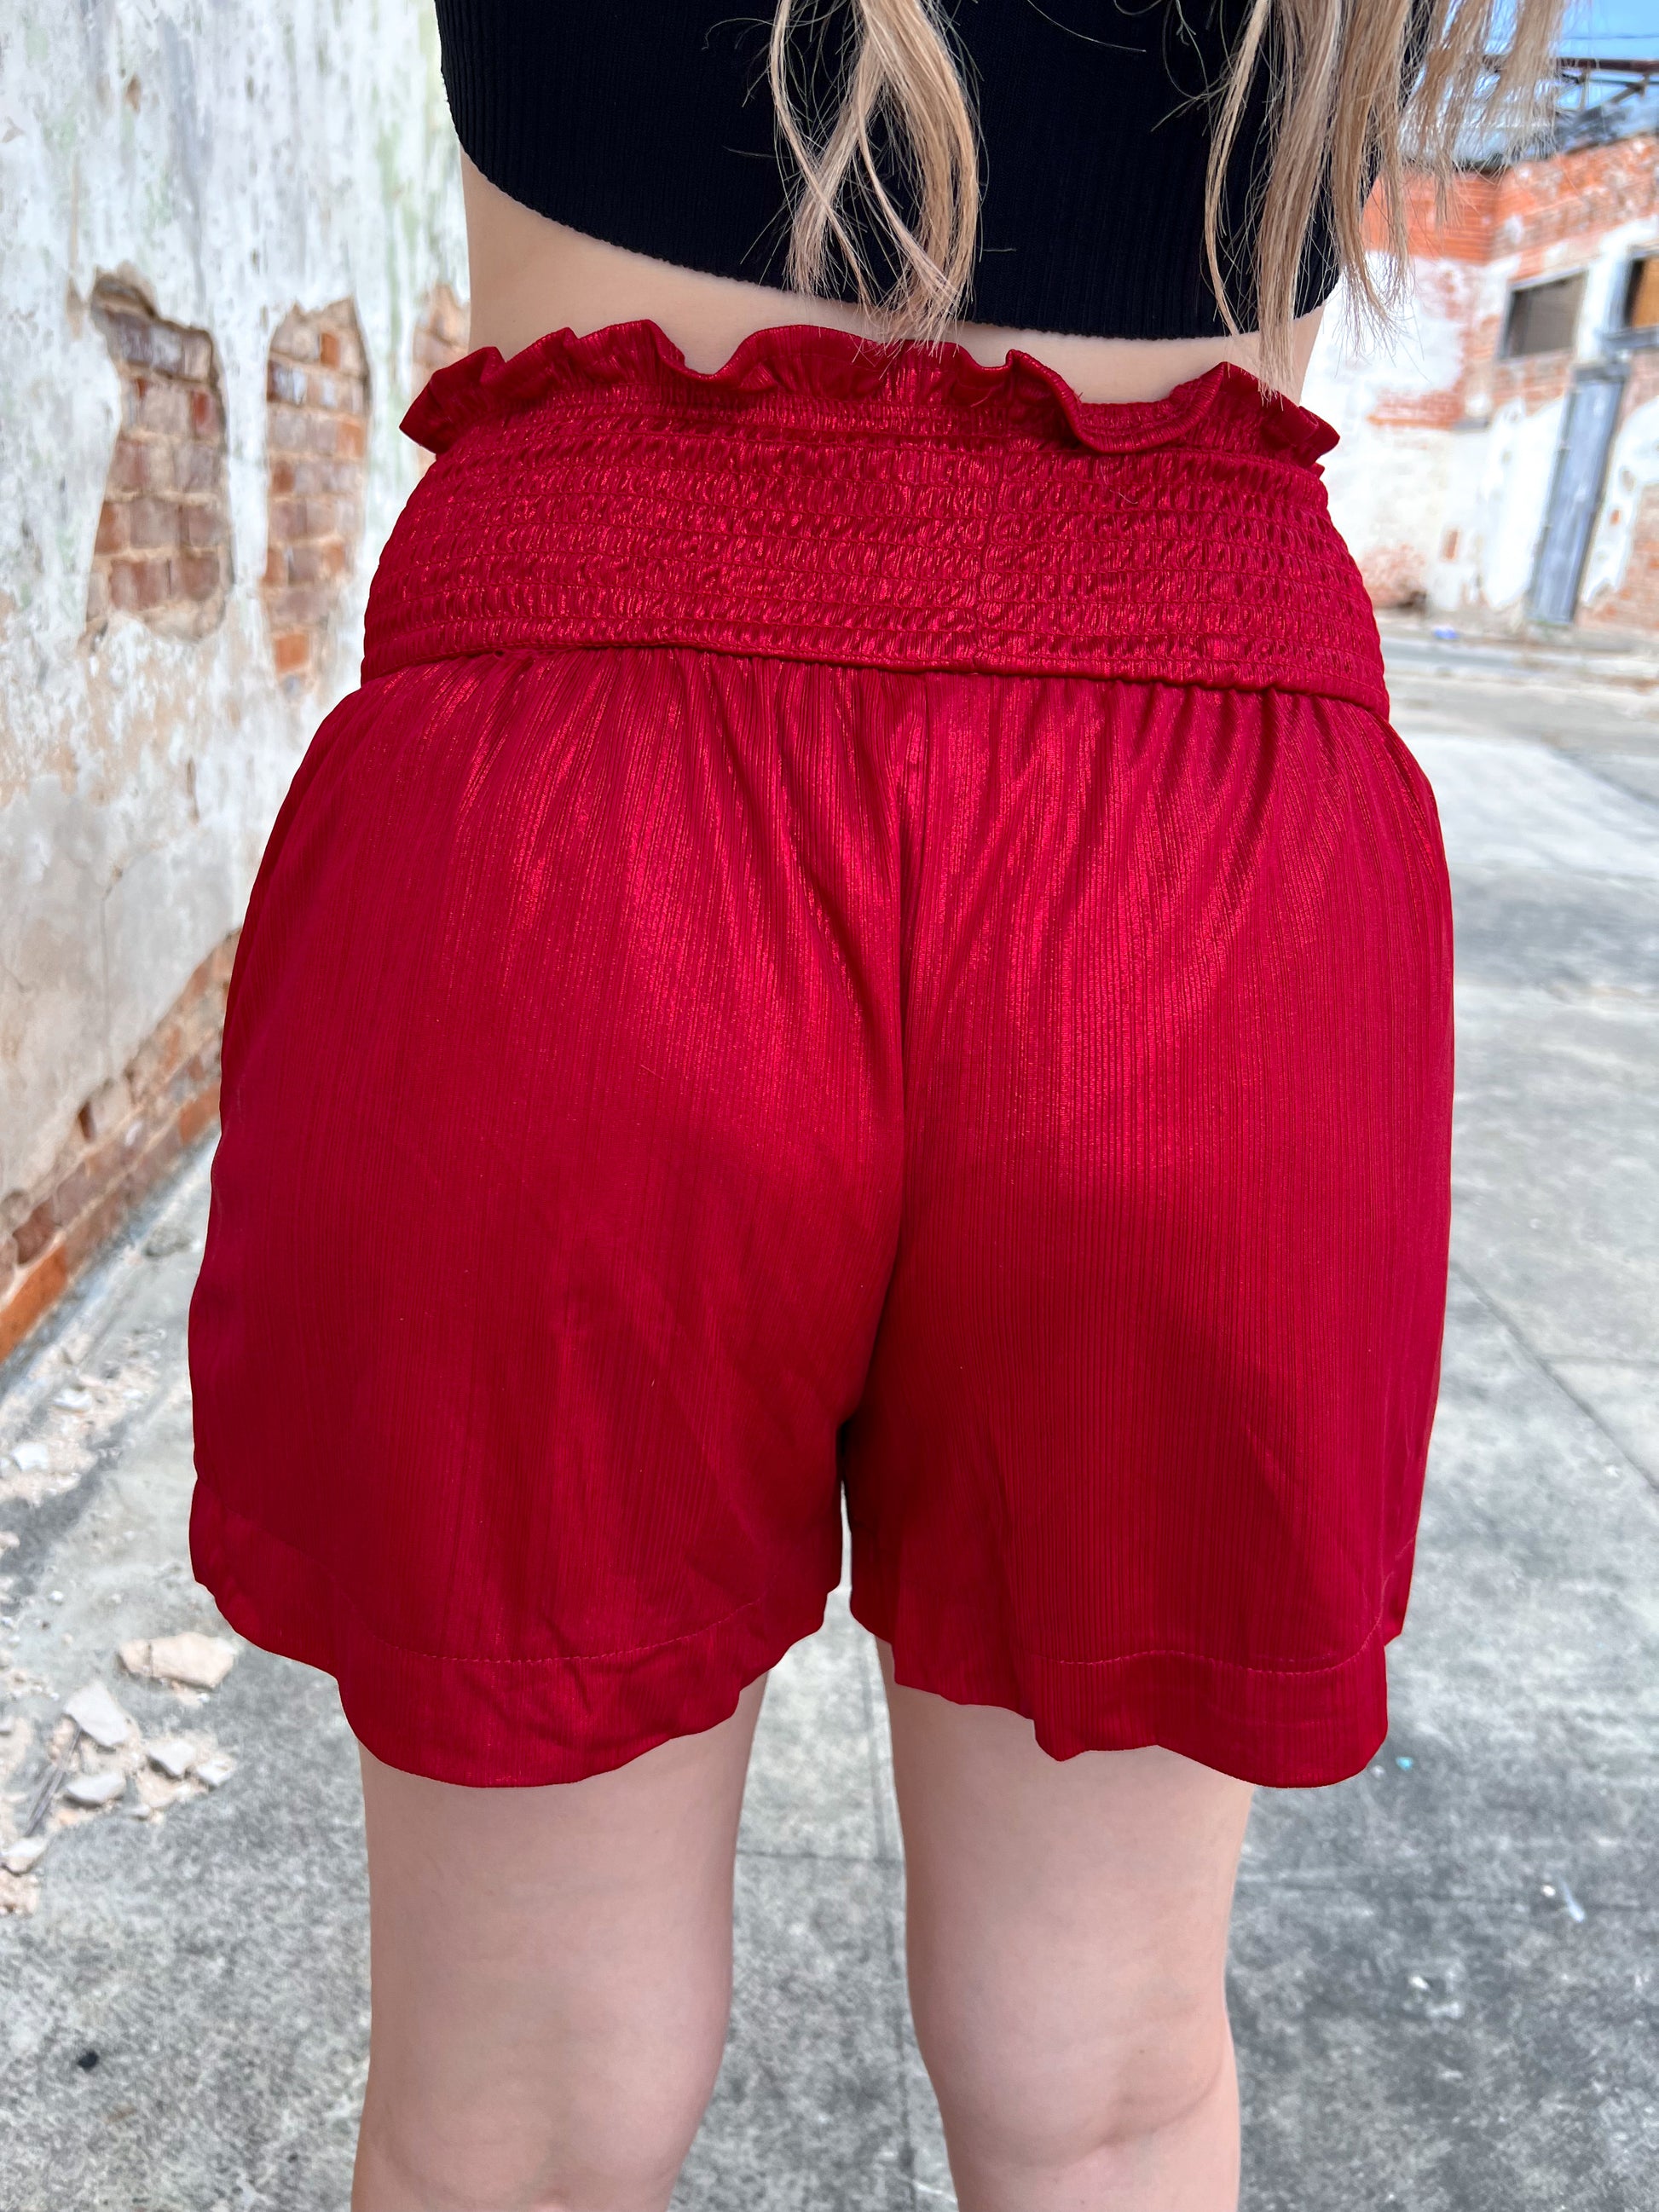 Red High Waisted Shimmer Shorts-Shorts-Southern Grace Wholesale-BIN A5, Max Retail-The Twisted Chandelier